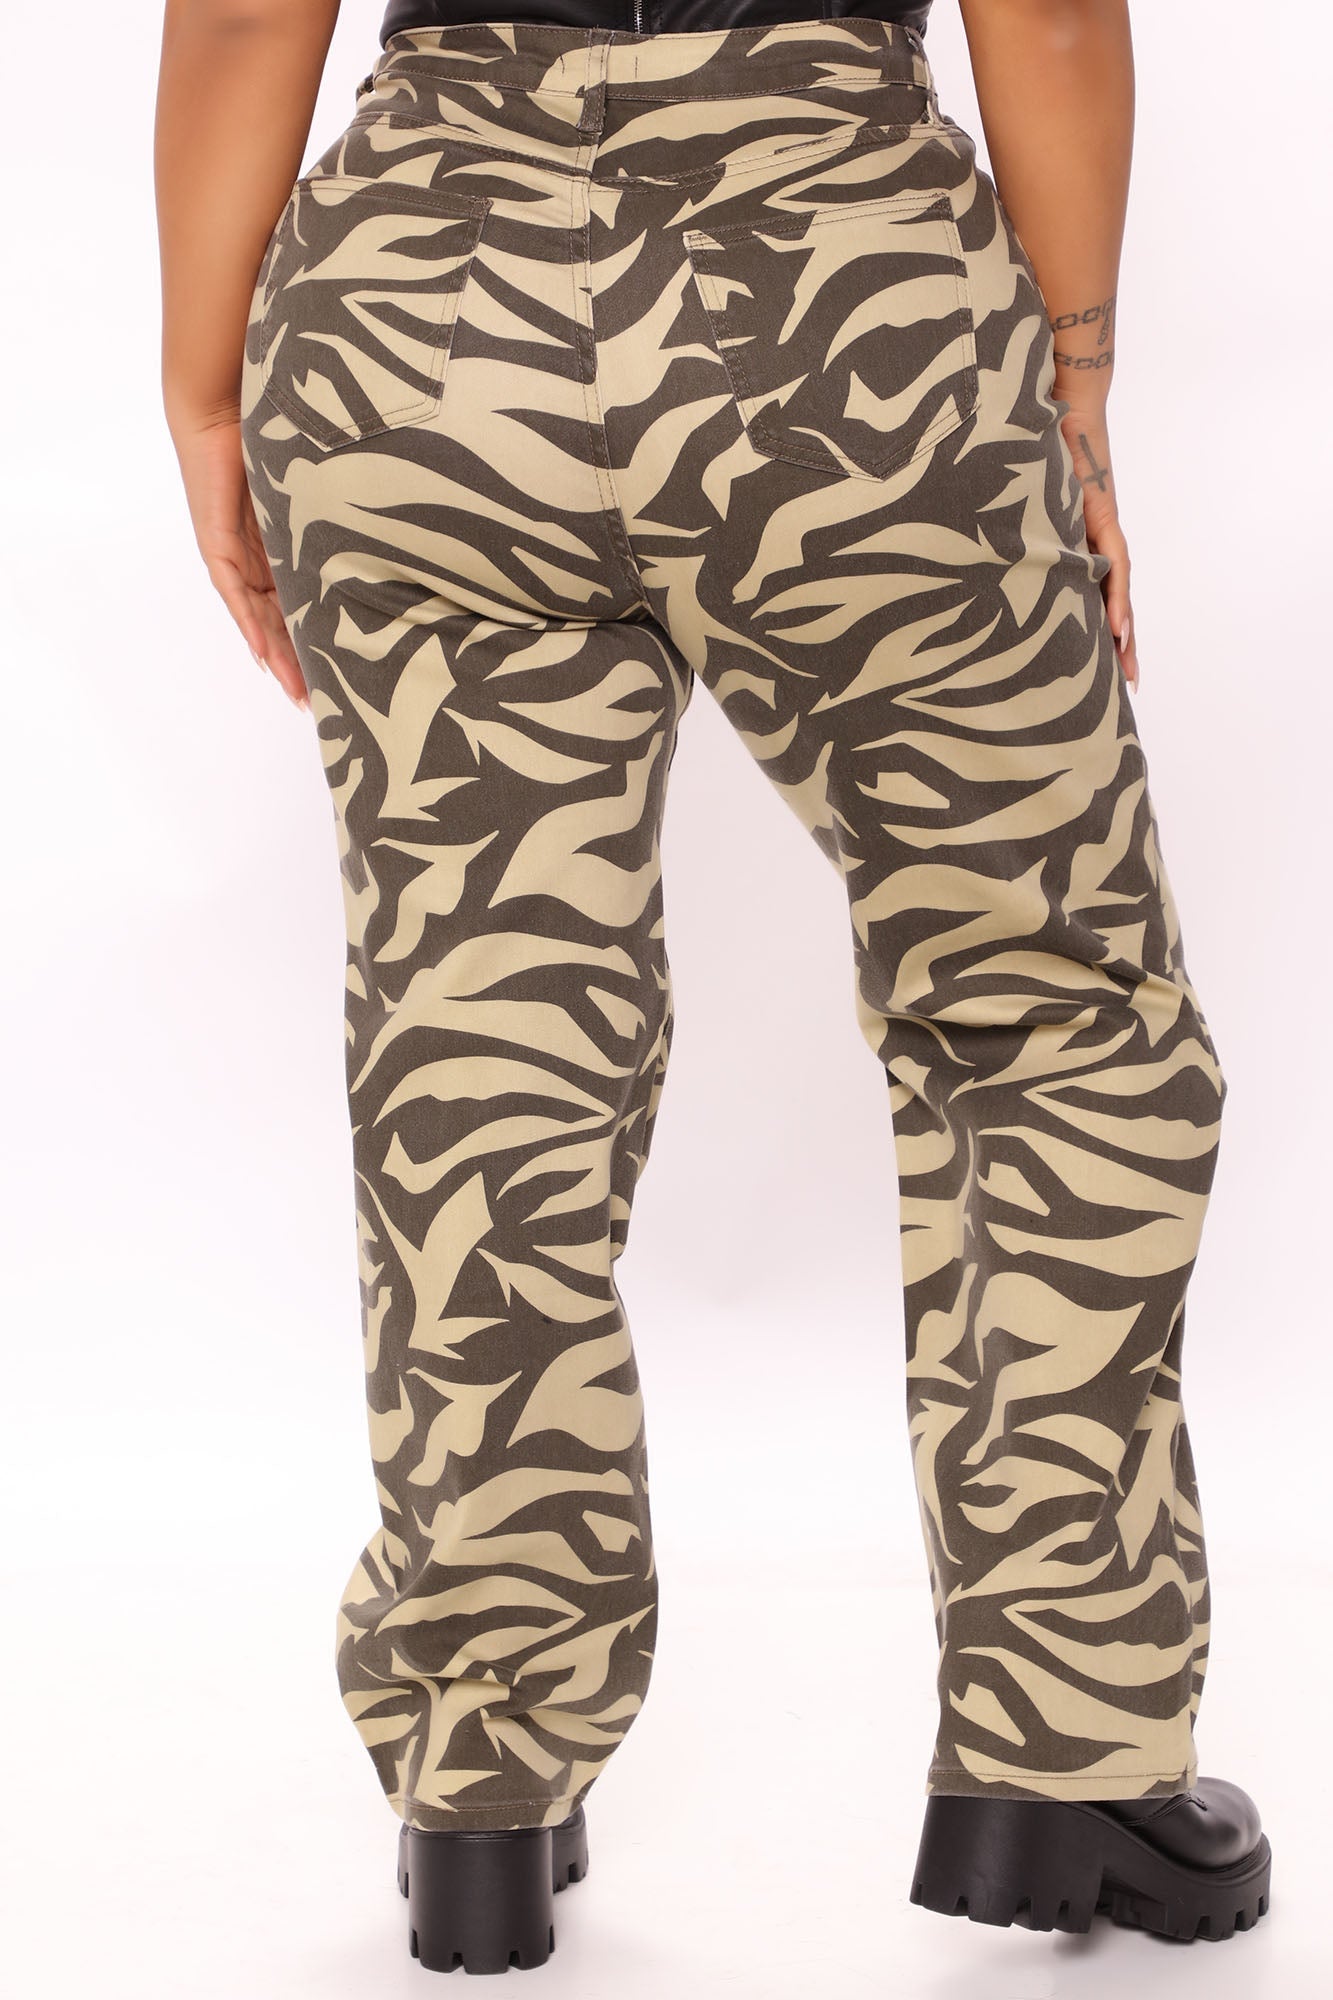 Wild Child Printed Straight Leg Jeans - Olive/combo